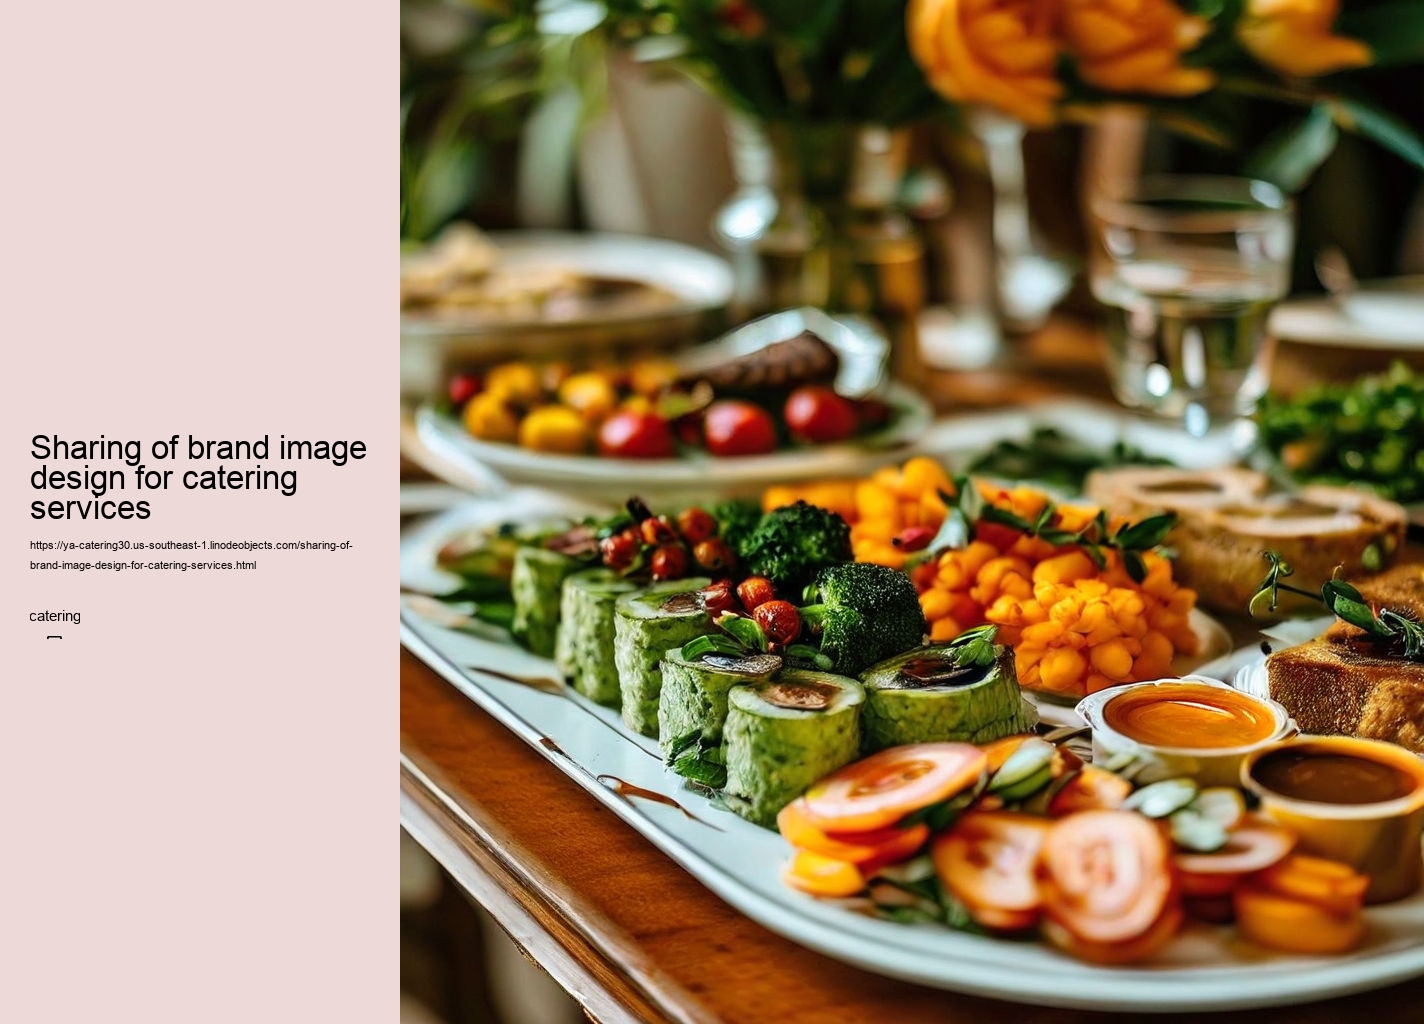 Sharing of brand image design for catering services